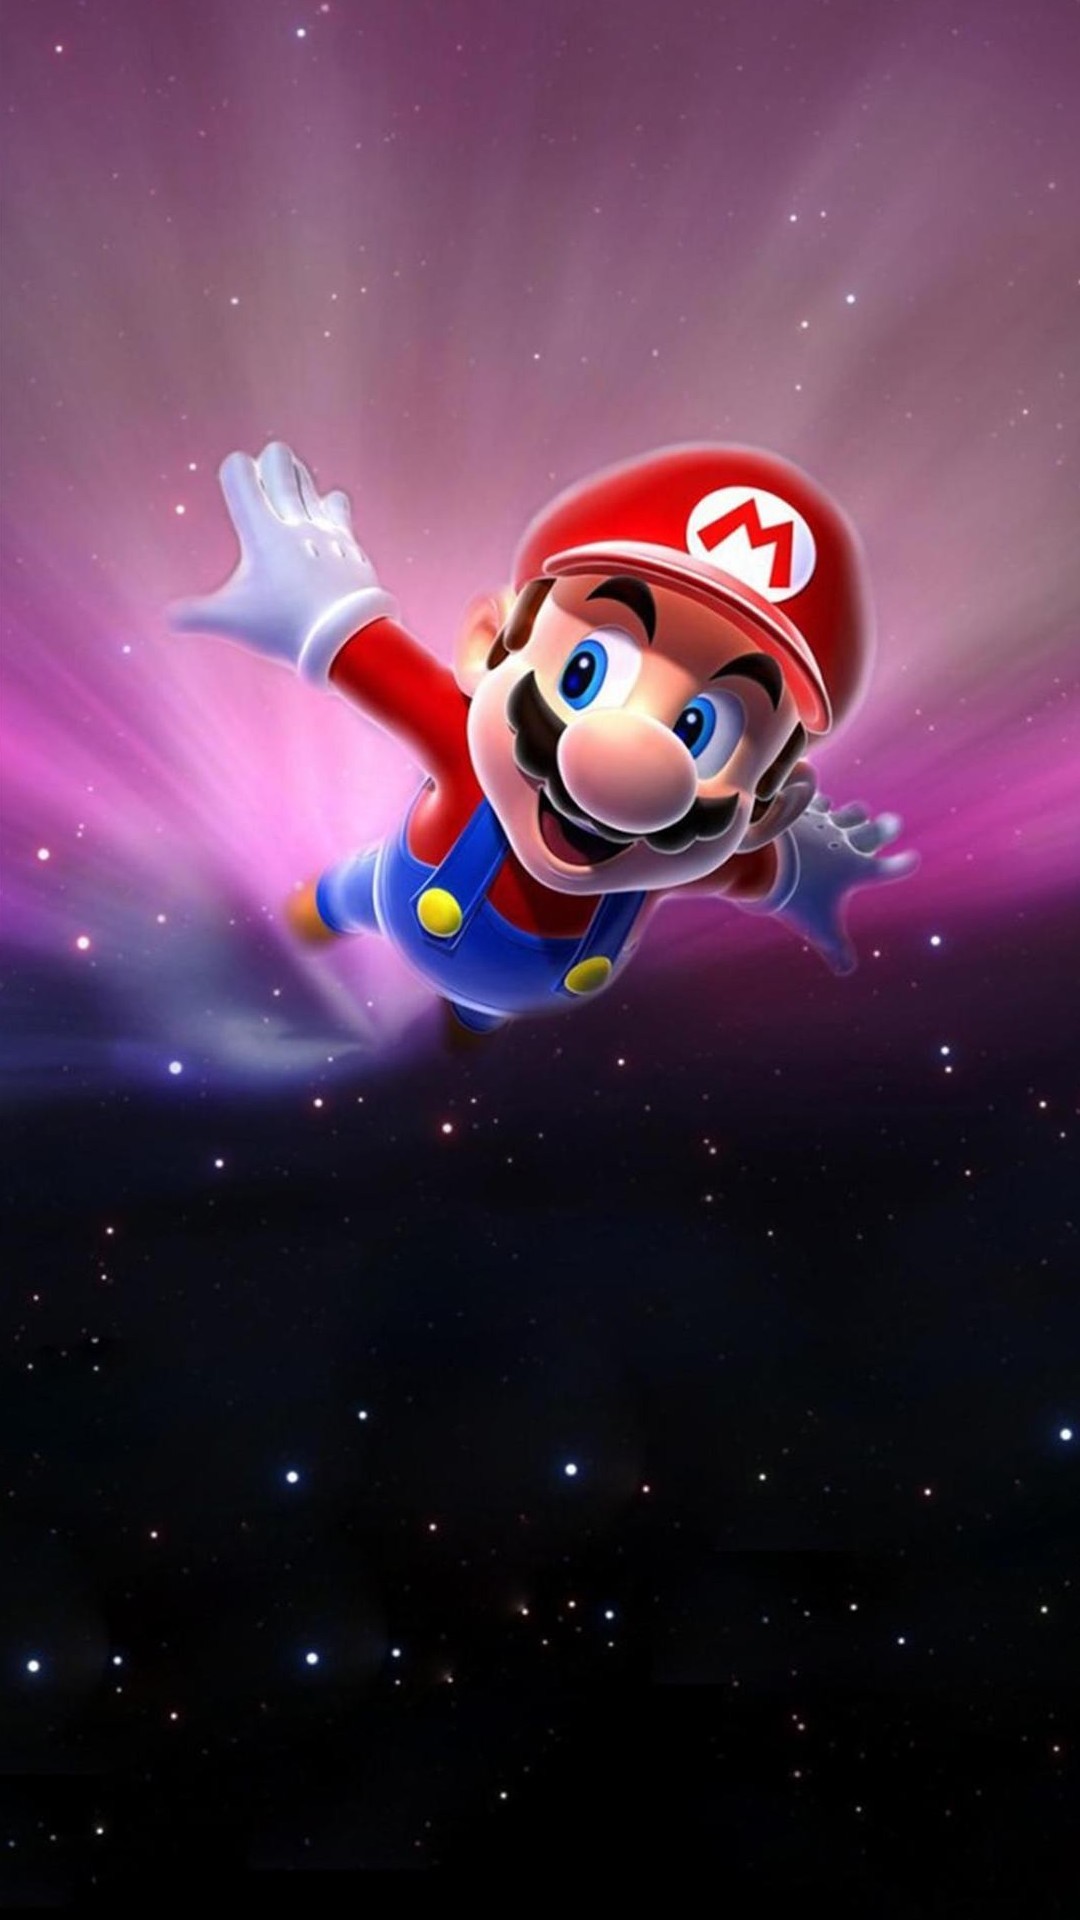 1080x1920 Super Mario Flying Poster Background For the kids :)